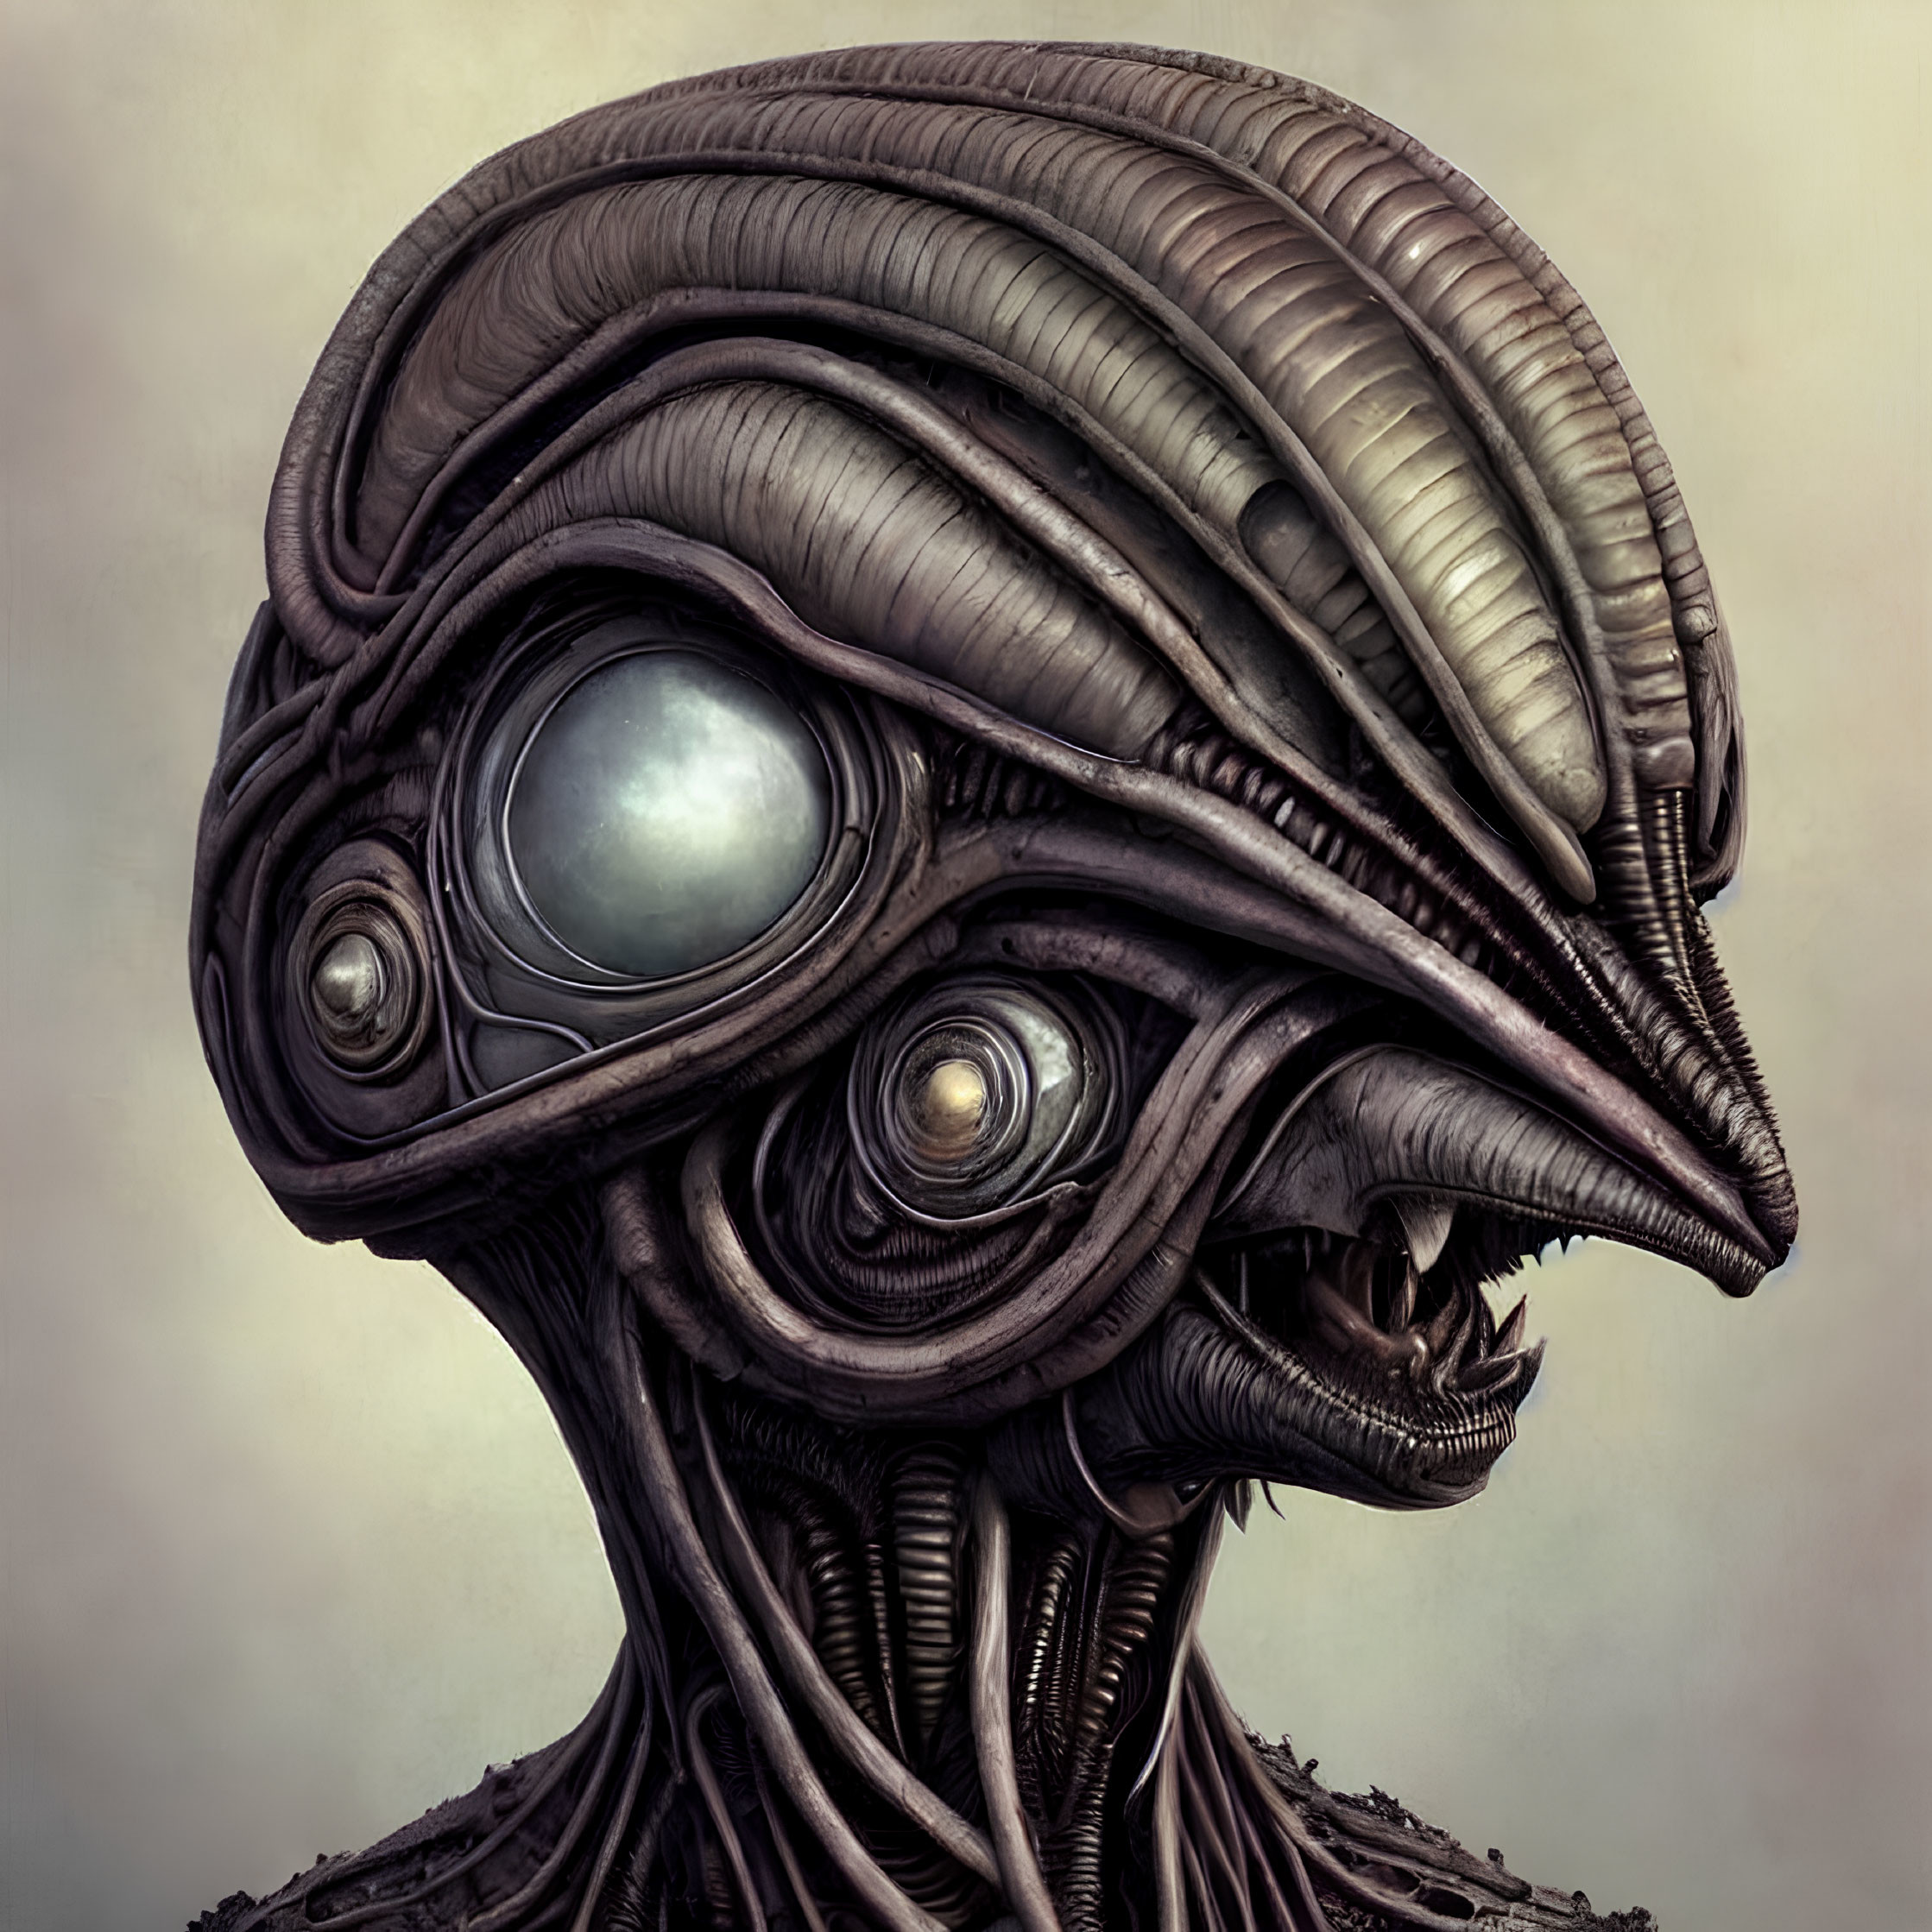 Detailed illustration of alien with layered skin and large eyes